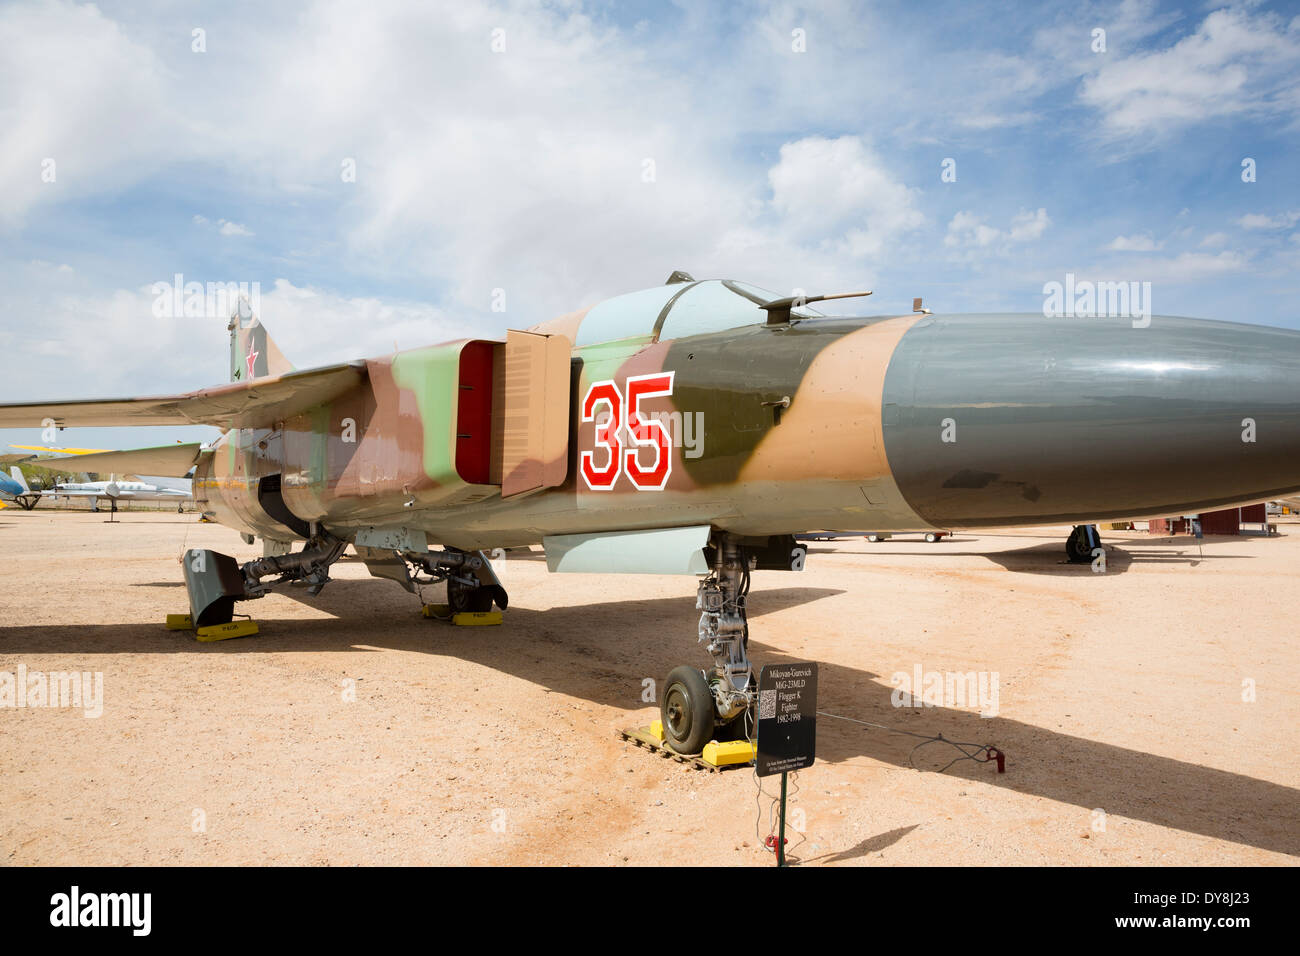 USA, Arizona, Tucson, Pima Air and Space Museum, Mikoyan-Gurevich MiG-23MLD 'Flogger-K', jet fighter. Stock Photo